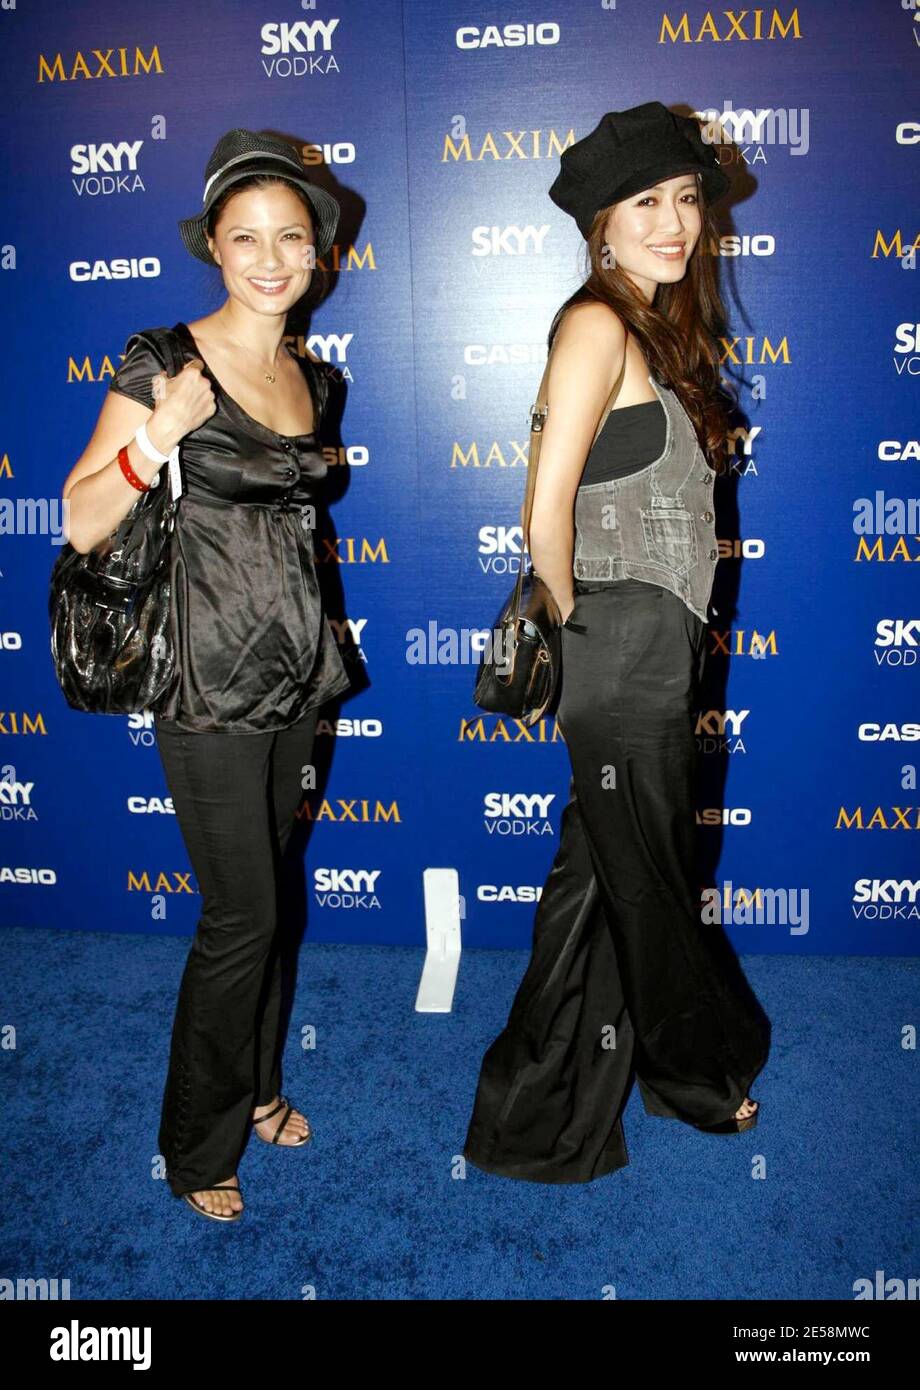 Mara Lane at the Maxim Style Awards presented by Casio at the Avalon in Hollywood. Los Angeles, Caif. 9/18/07.   [[wam]] Stock Photo